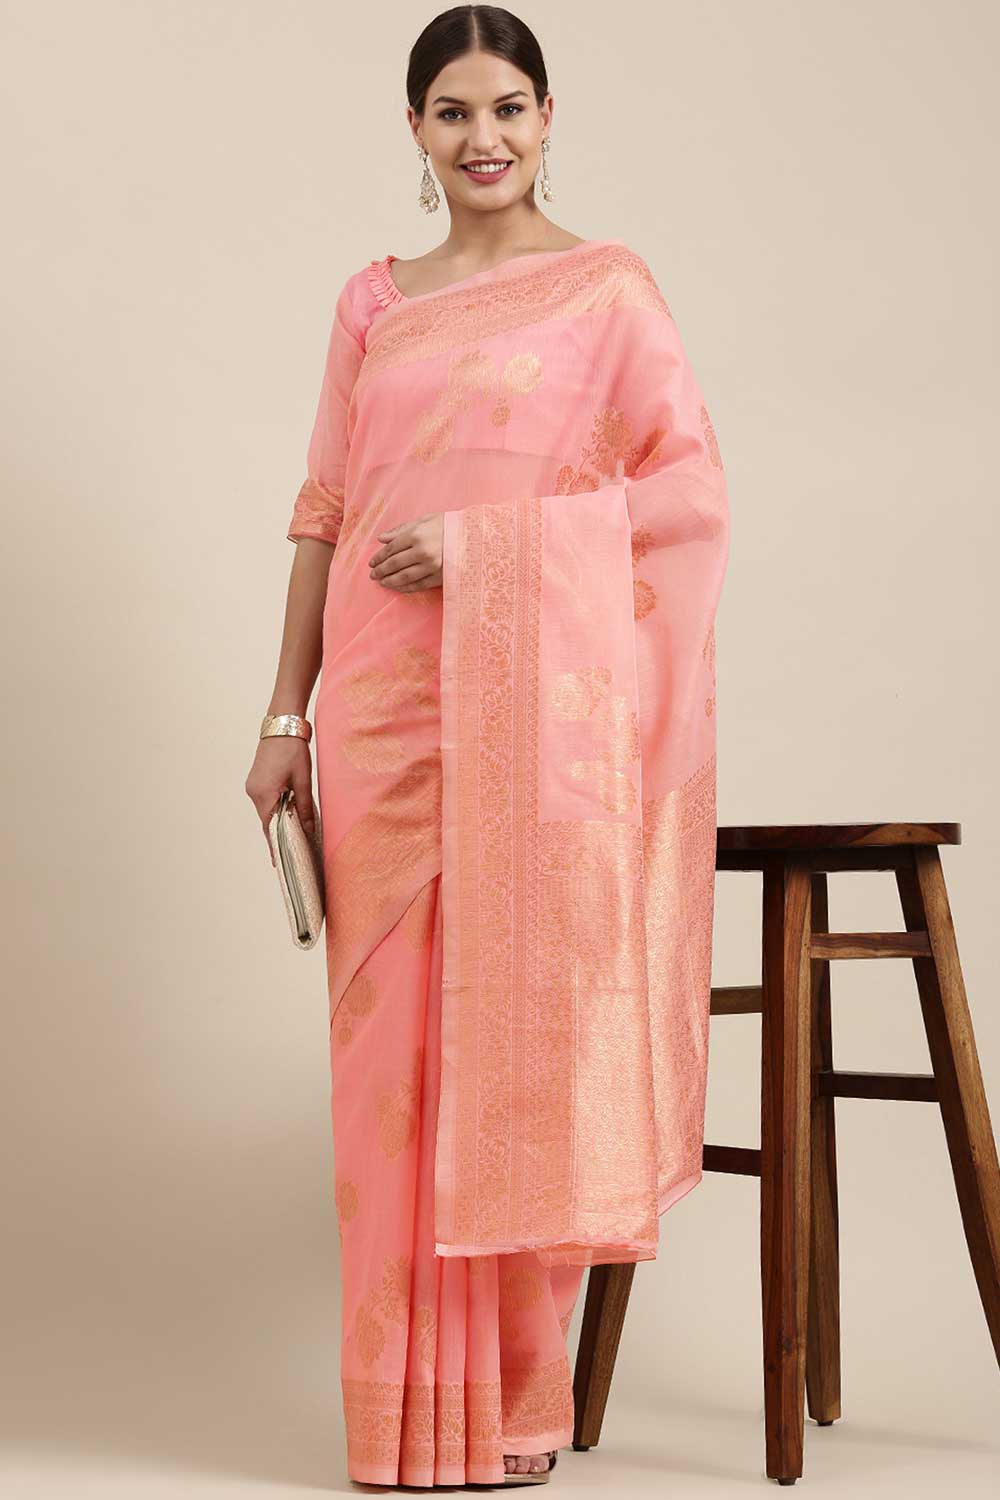 Buy Kiku Peach Floral Woven Blended Linen One Minute Saree Online